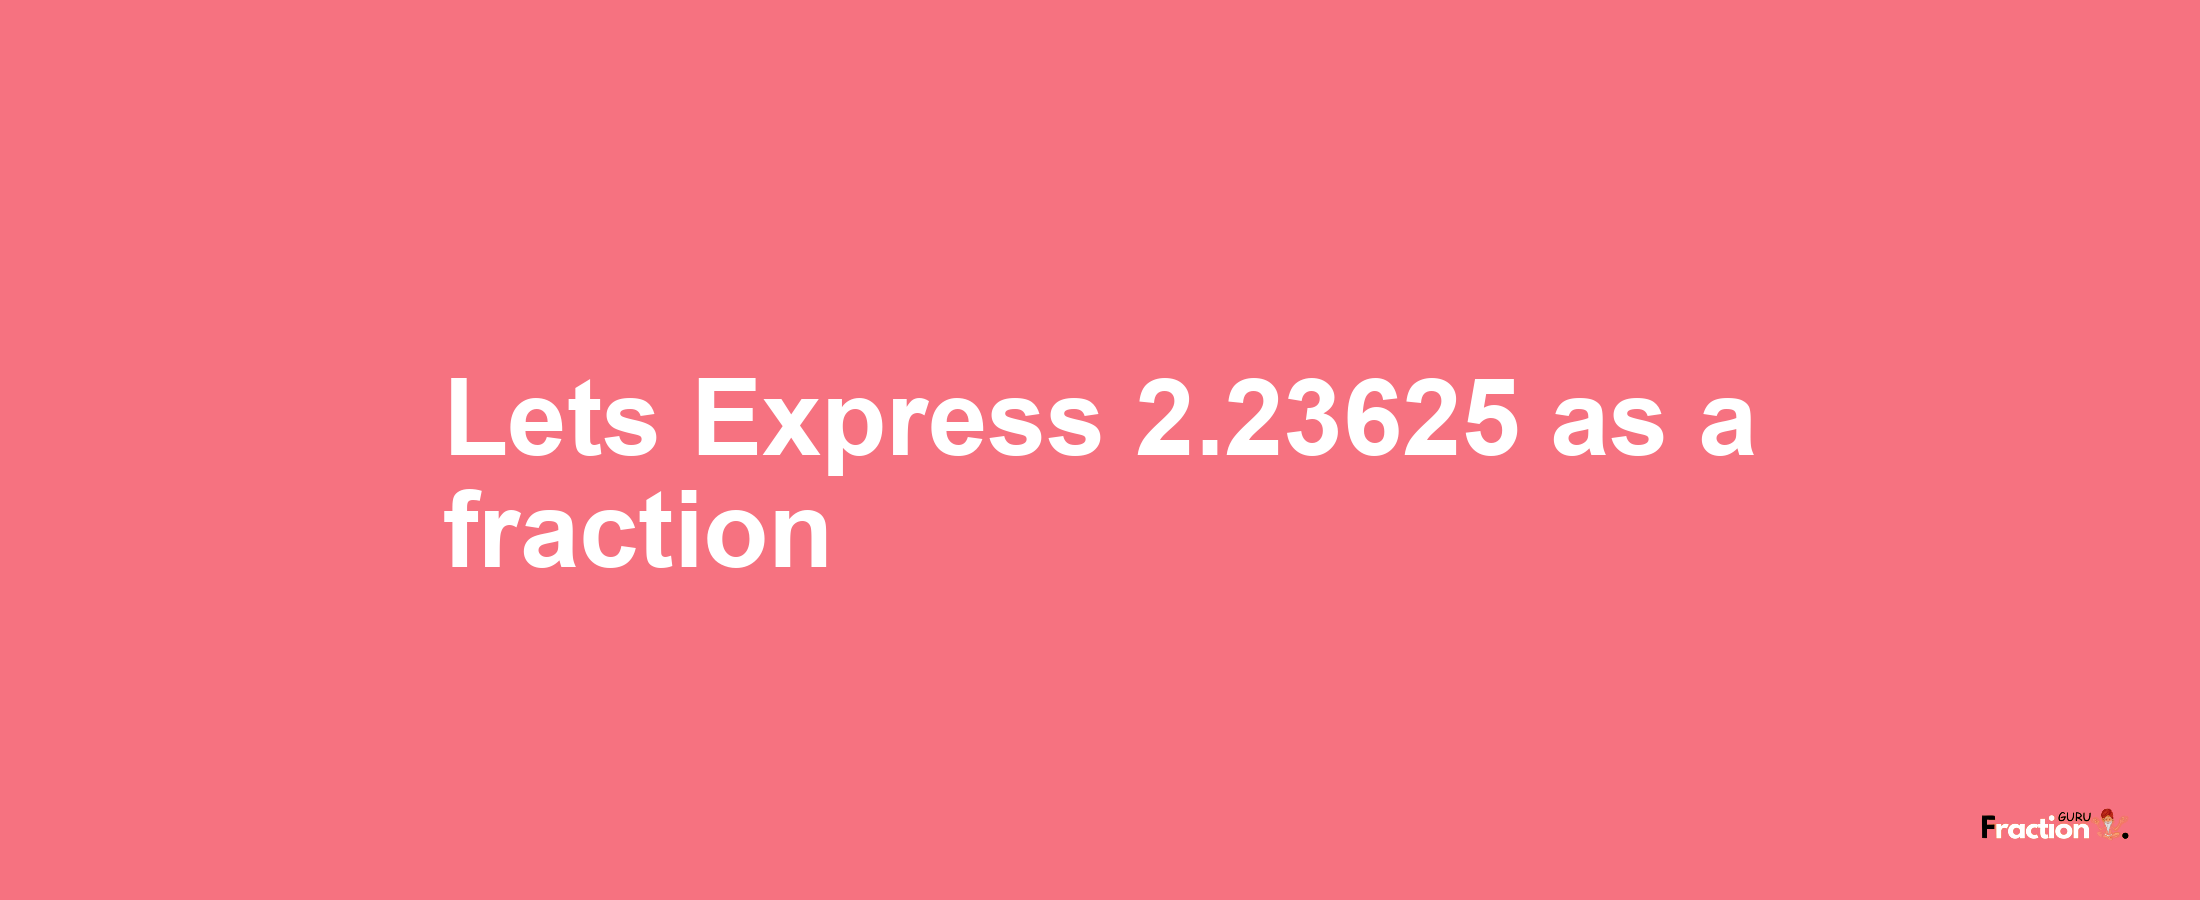 Lets Express 2.23625 as afraction